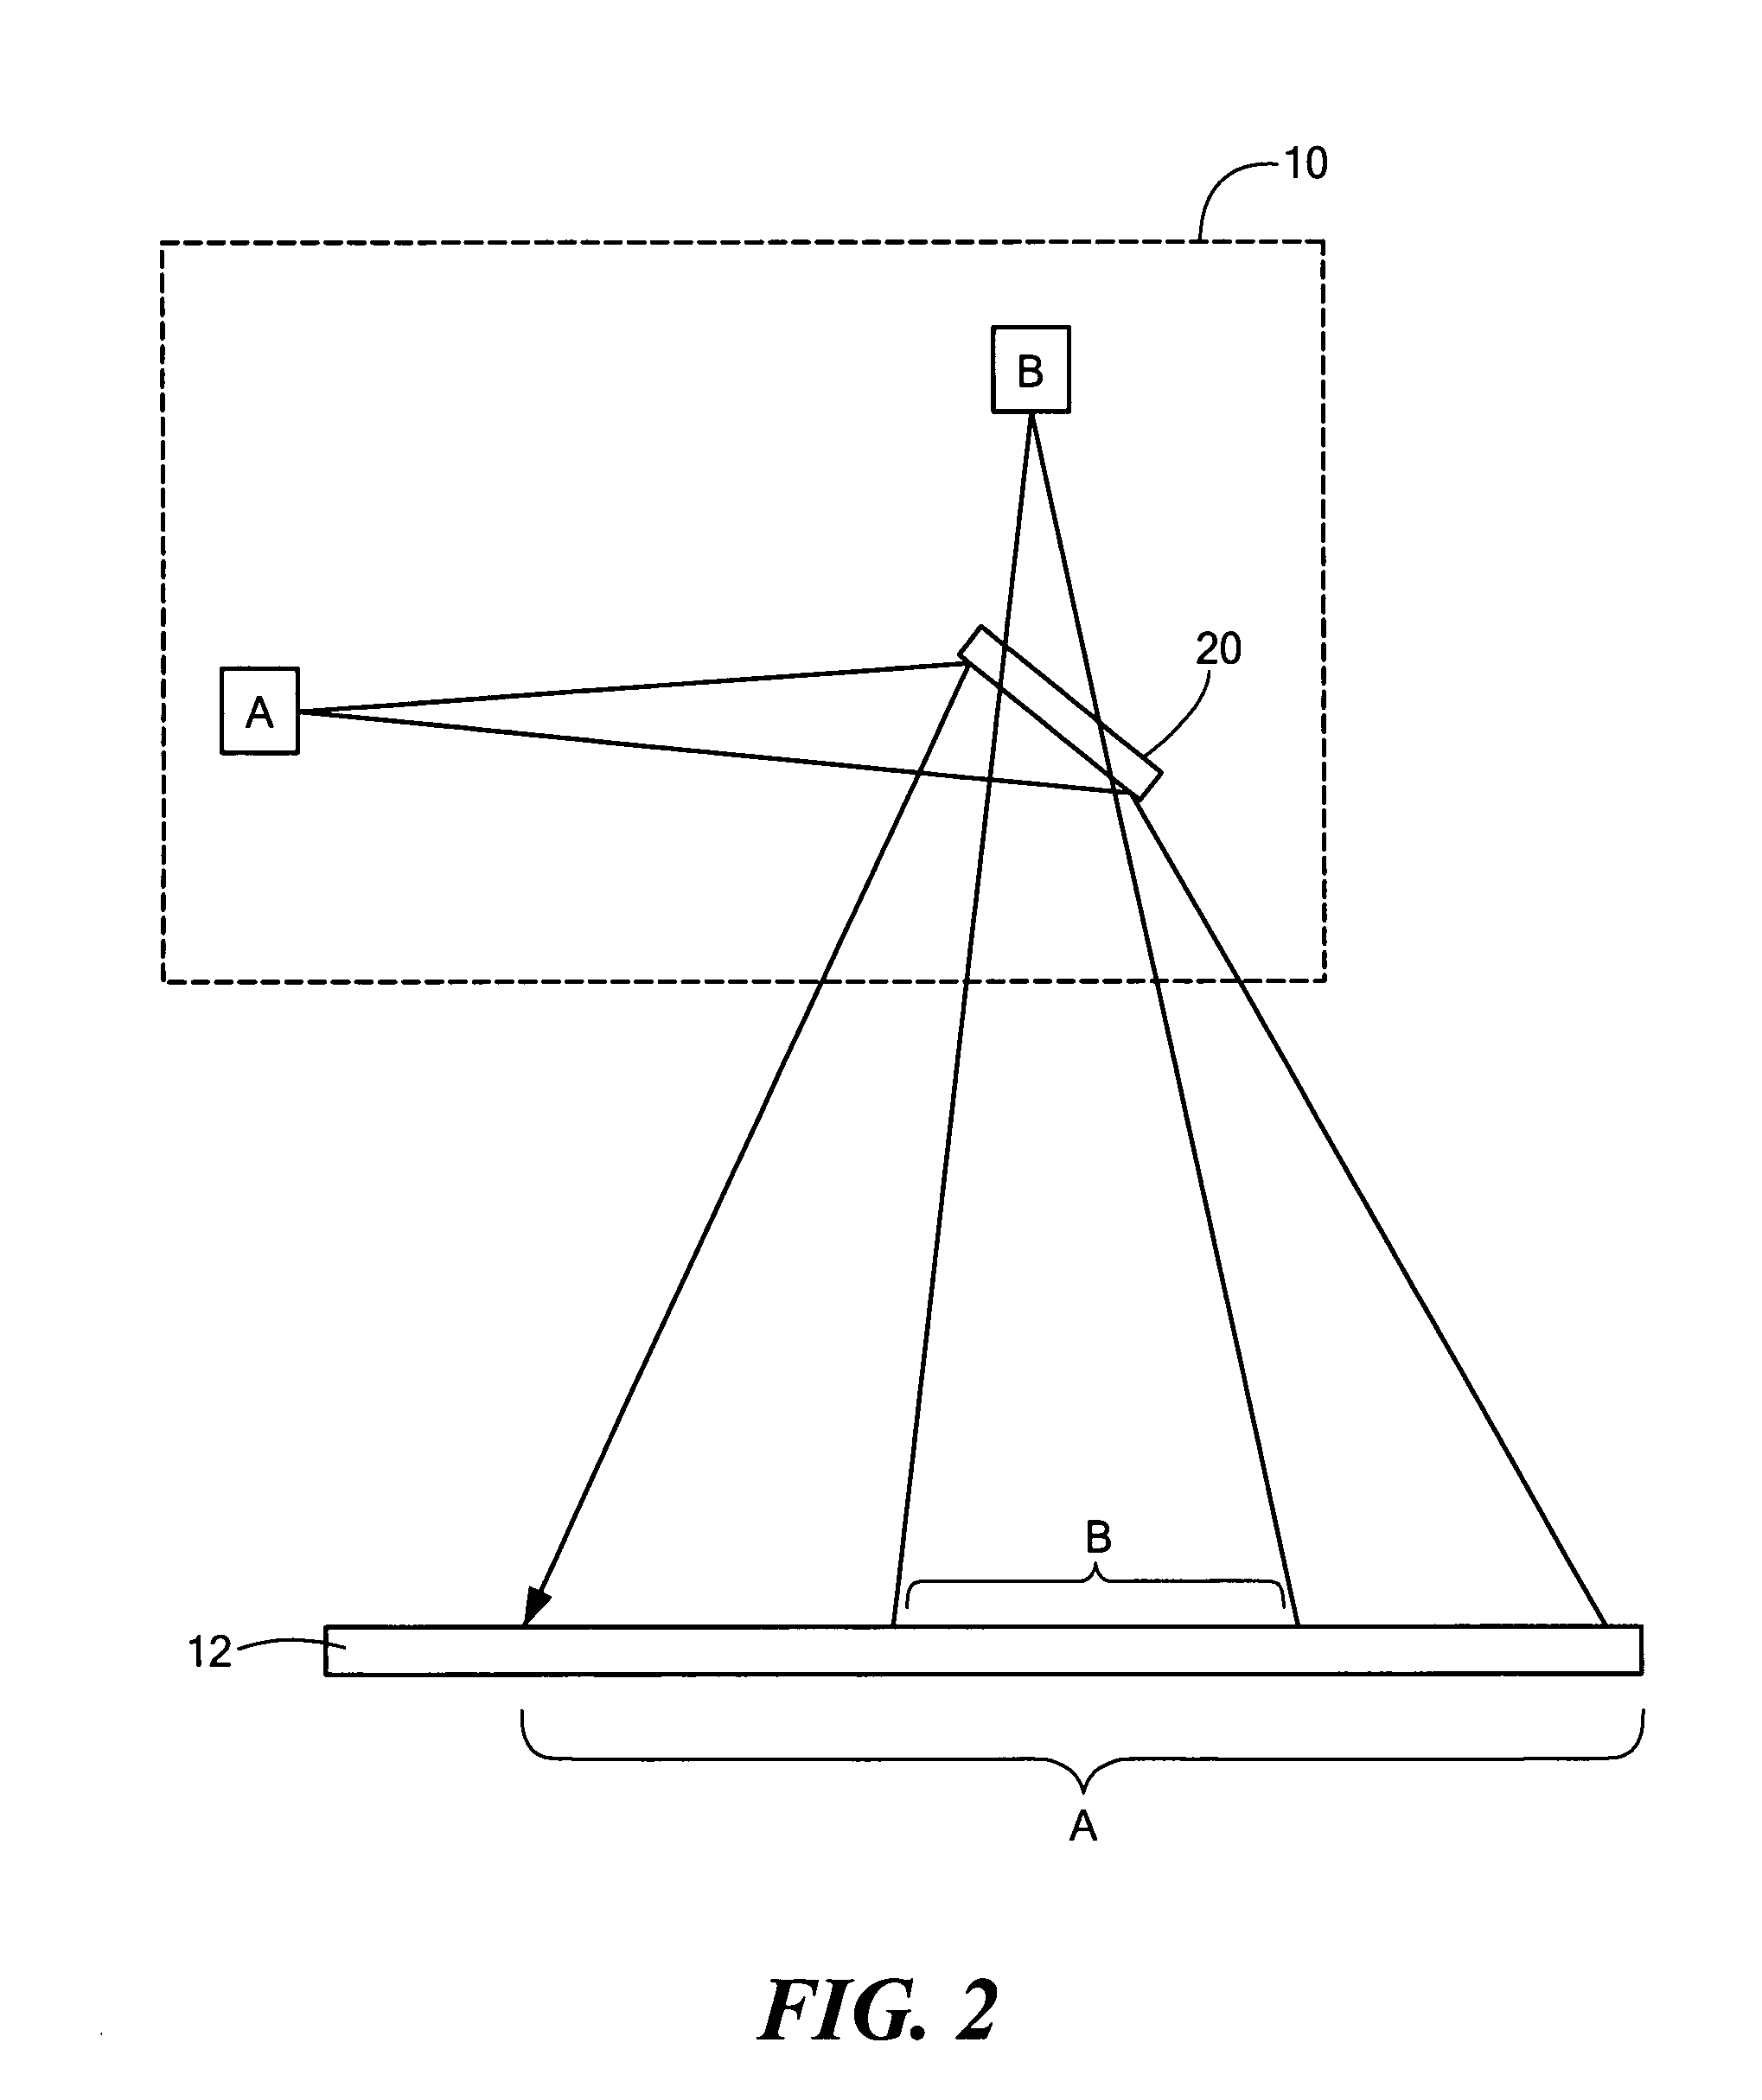 Non-contact passive ranging system